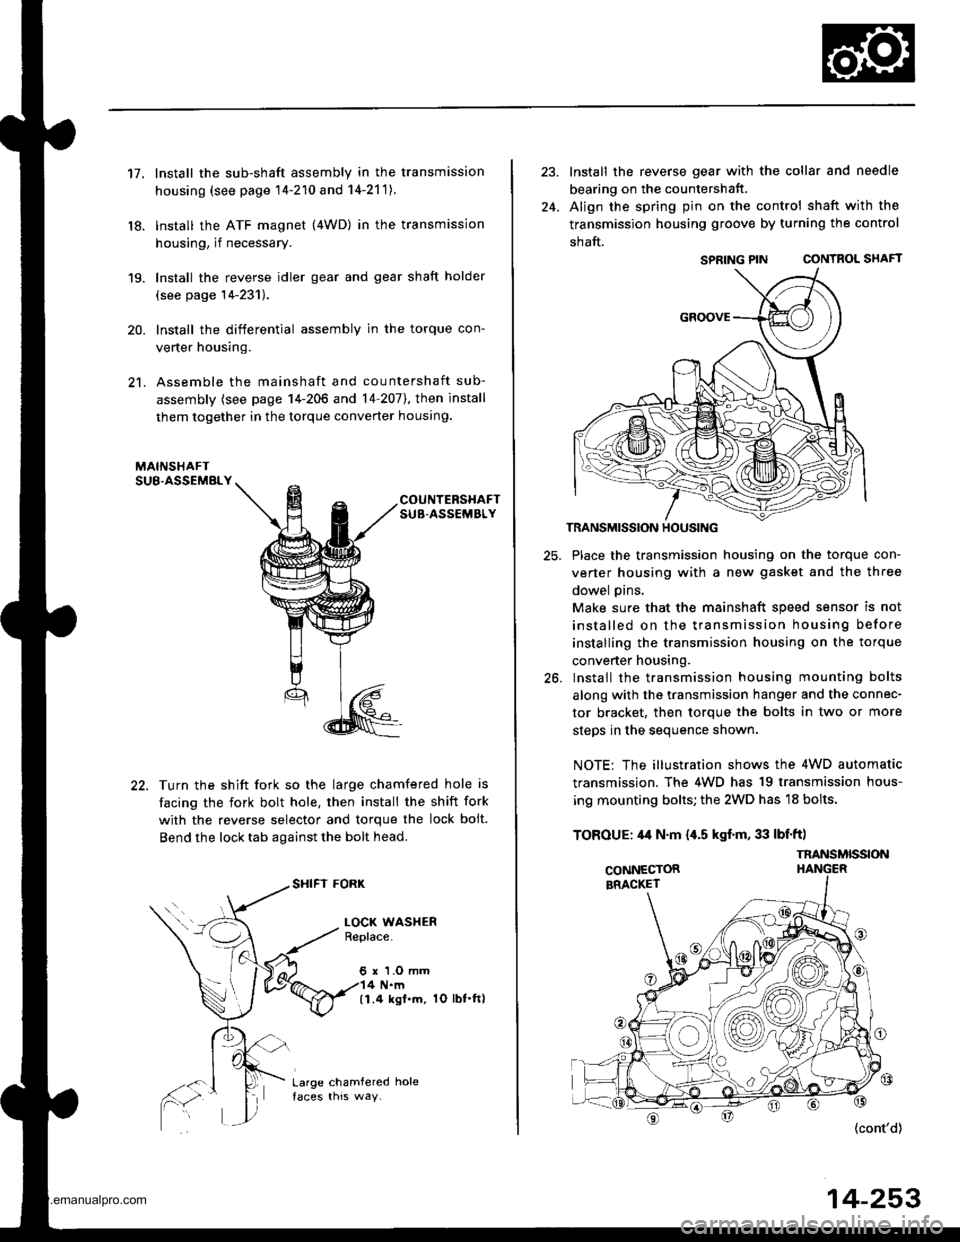 HONDA CR-V 1999 RD1-RD3 / 1.G Service Manual 
17.
18.
19.
20.
21.
Install the sub-shaft assembly in the transmission
housing (see page 14-210 and 14-2111.
lnstall the ATF magnet (4WD) in the transmission
housing, if necessary.
Install the rever